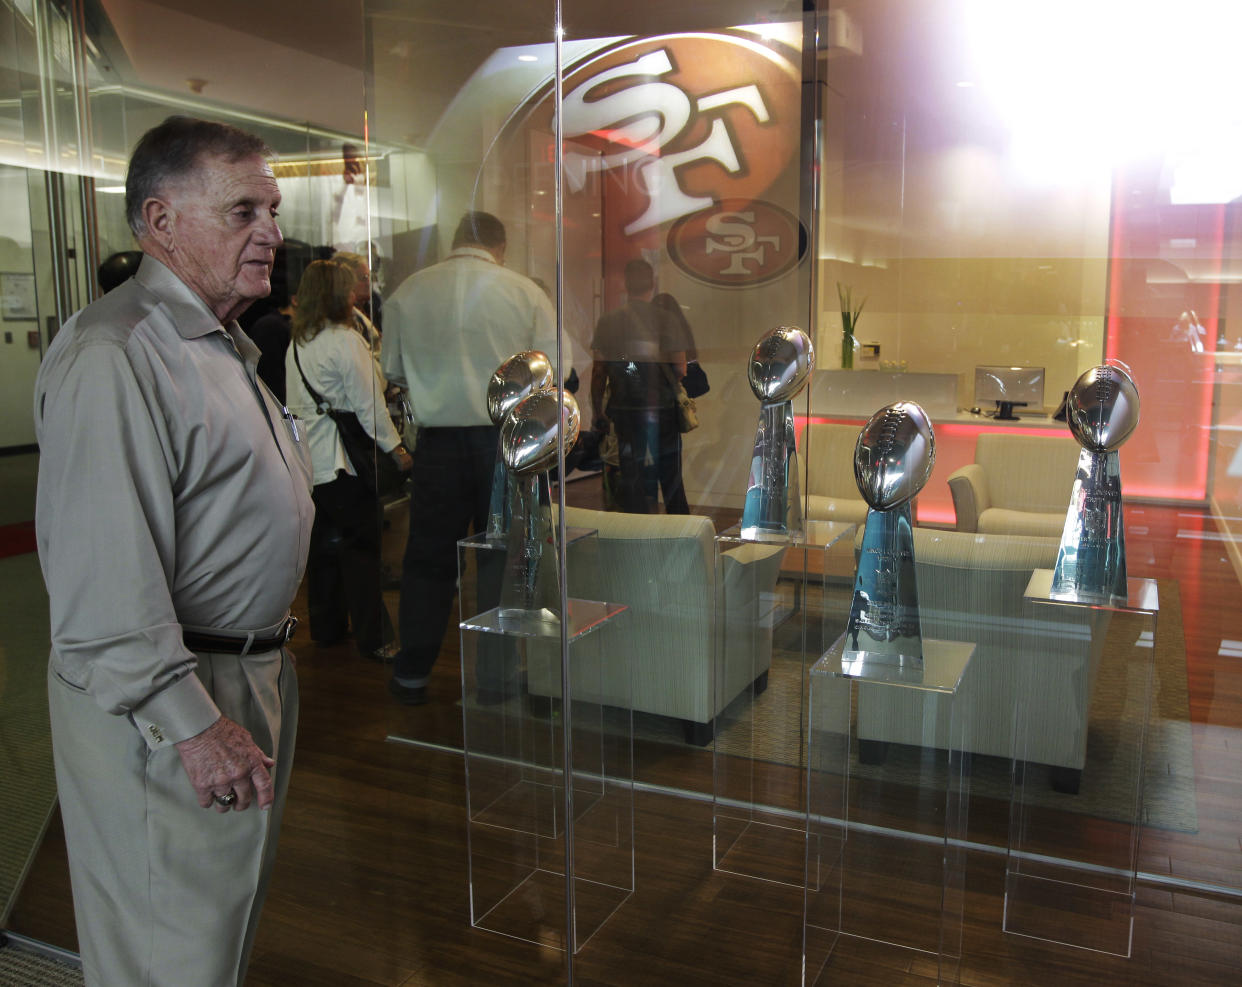 Retired San Francisco 49ers general manager John McVay looks at five 49ers Super Bowl trophies from his time with the NFL football team, at the Preview Center in Santa Clara, Calif., where a model of a proposed new stadium for the 49ers was on display Tuesday, Sept. 27, 2011. (AP Photo/Paul Sakuma)